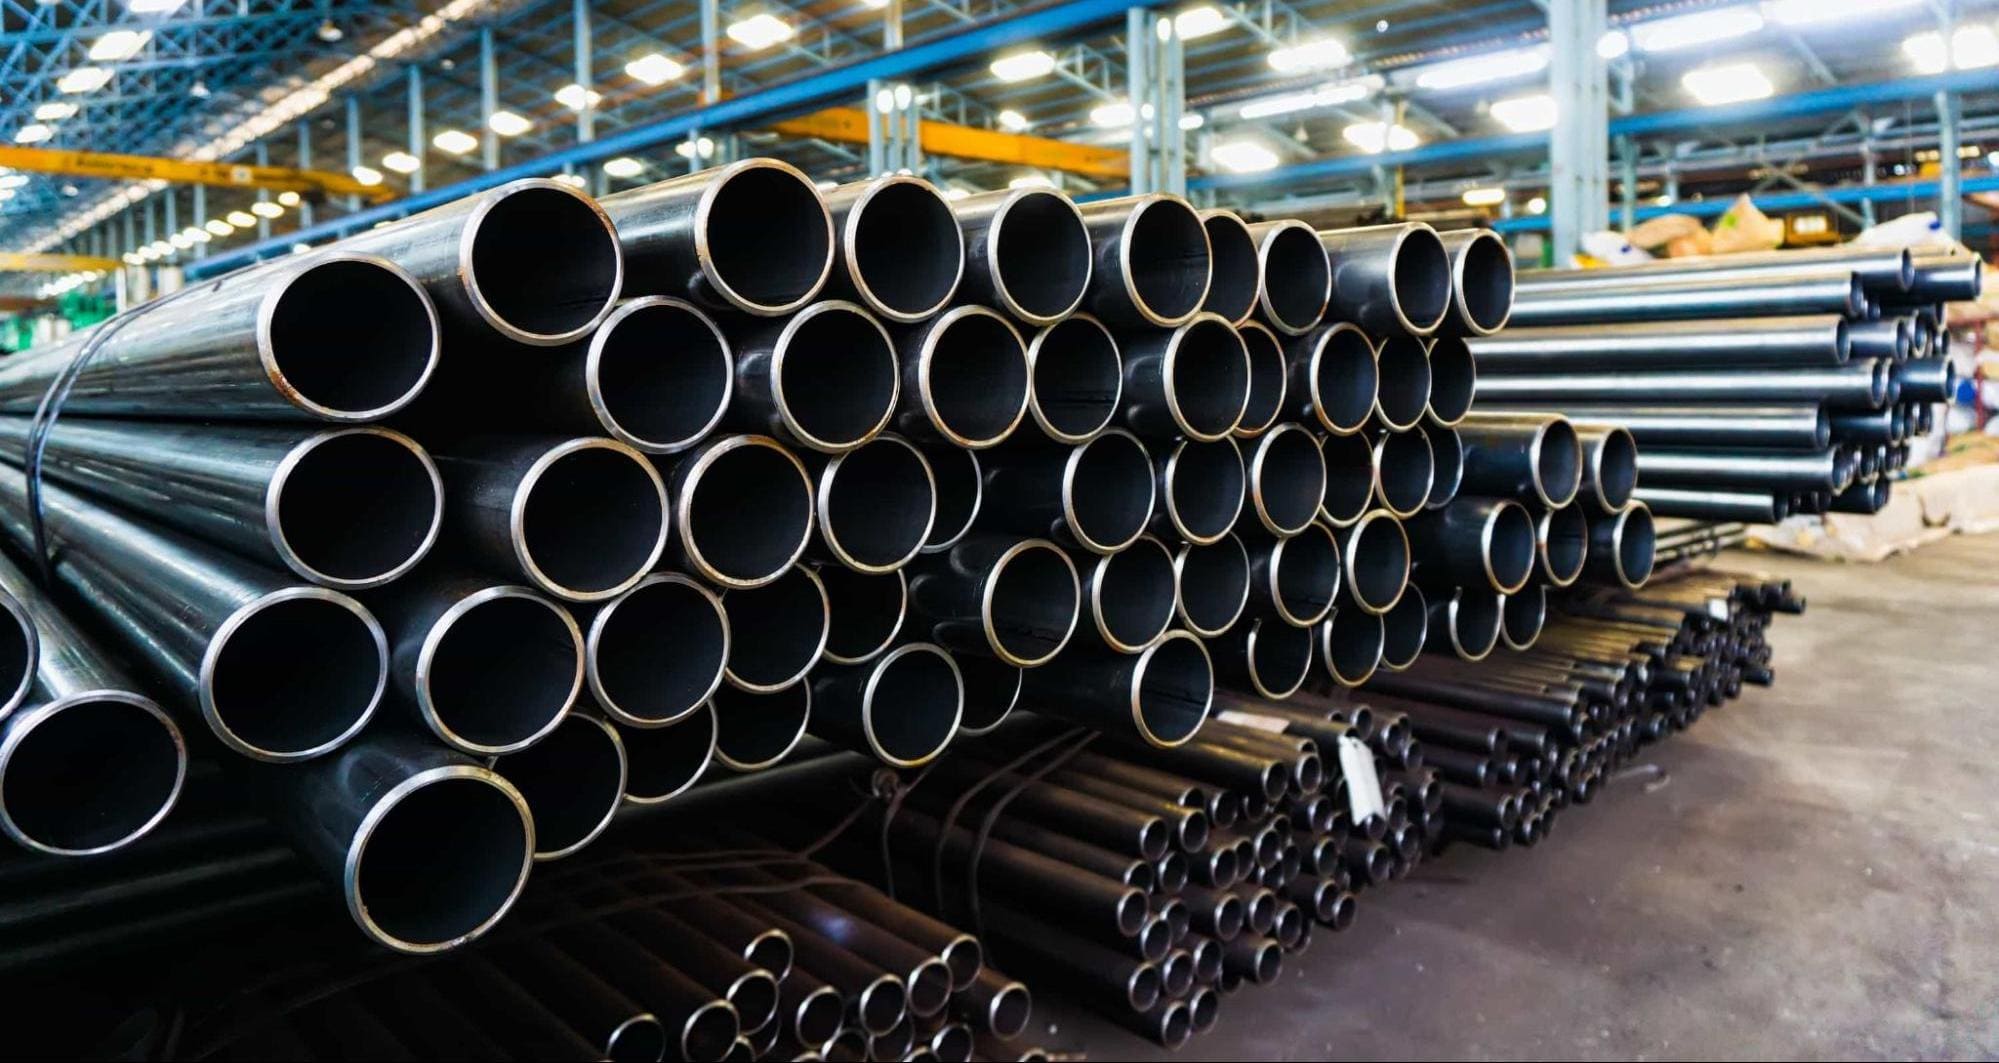 Vibhor Steel Tubes Limited IPO: Everything you need to know